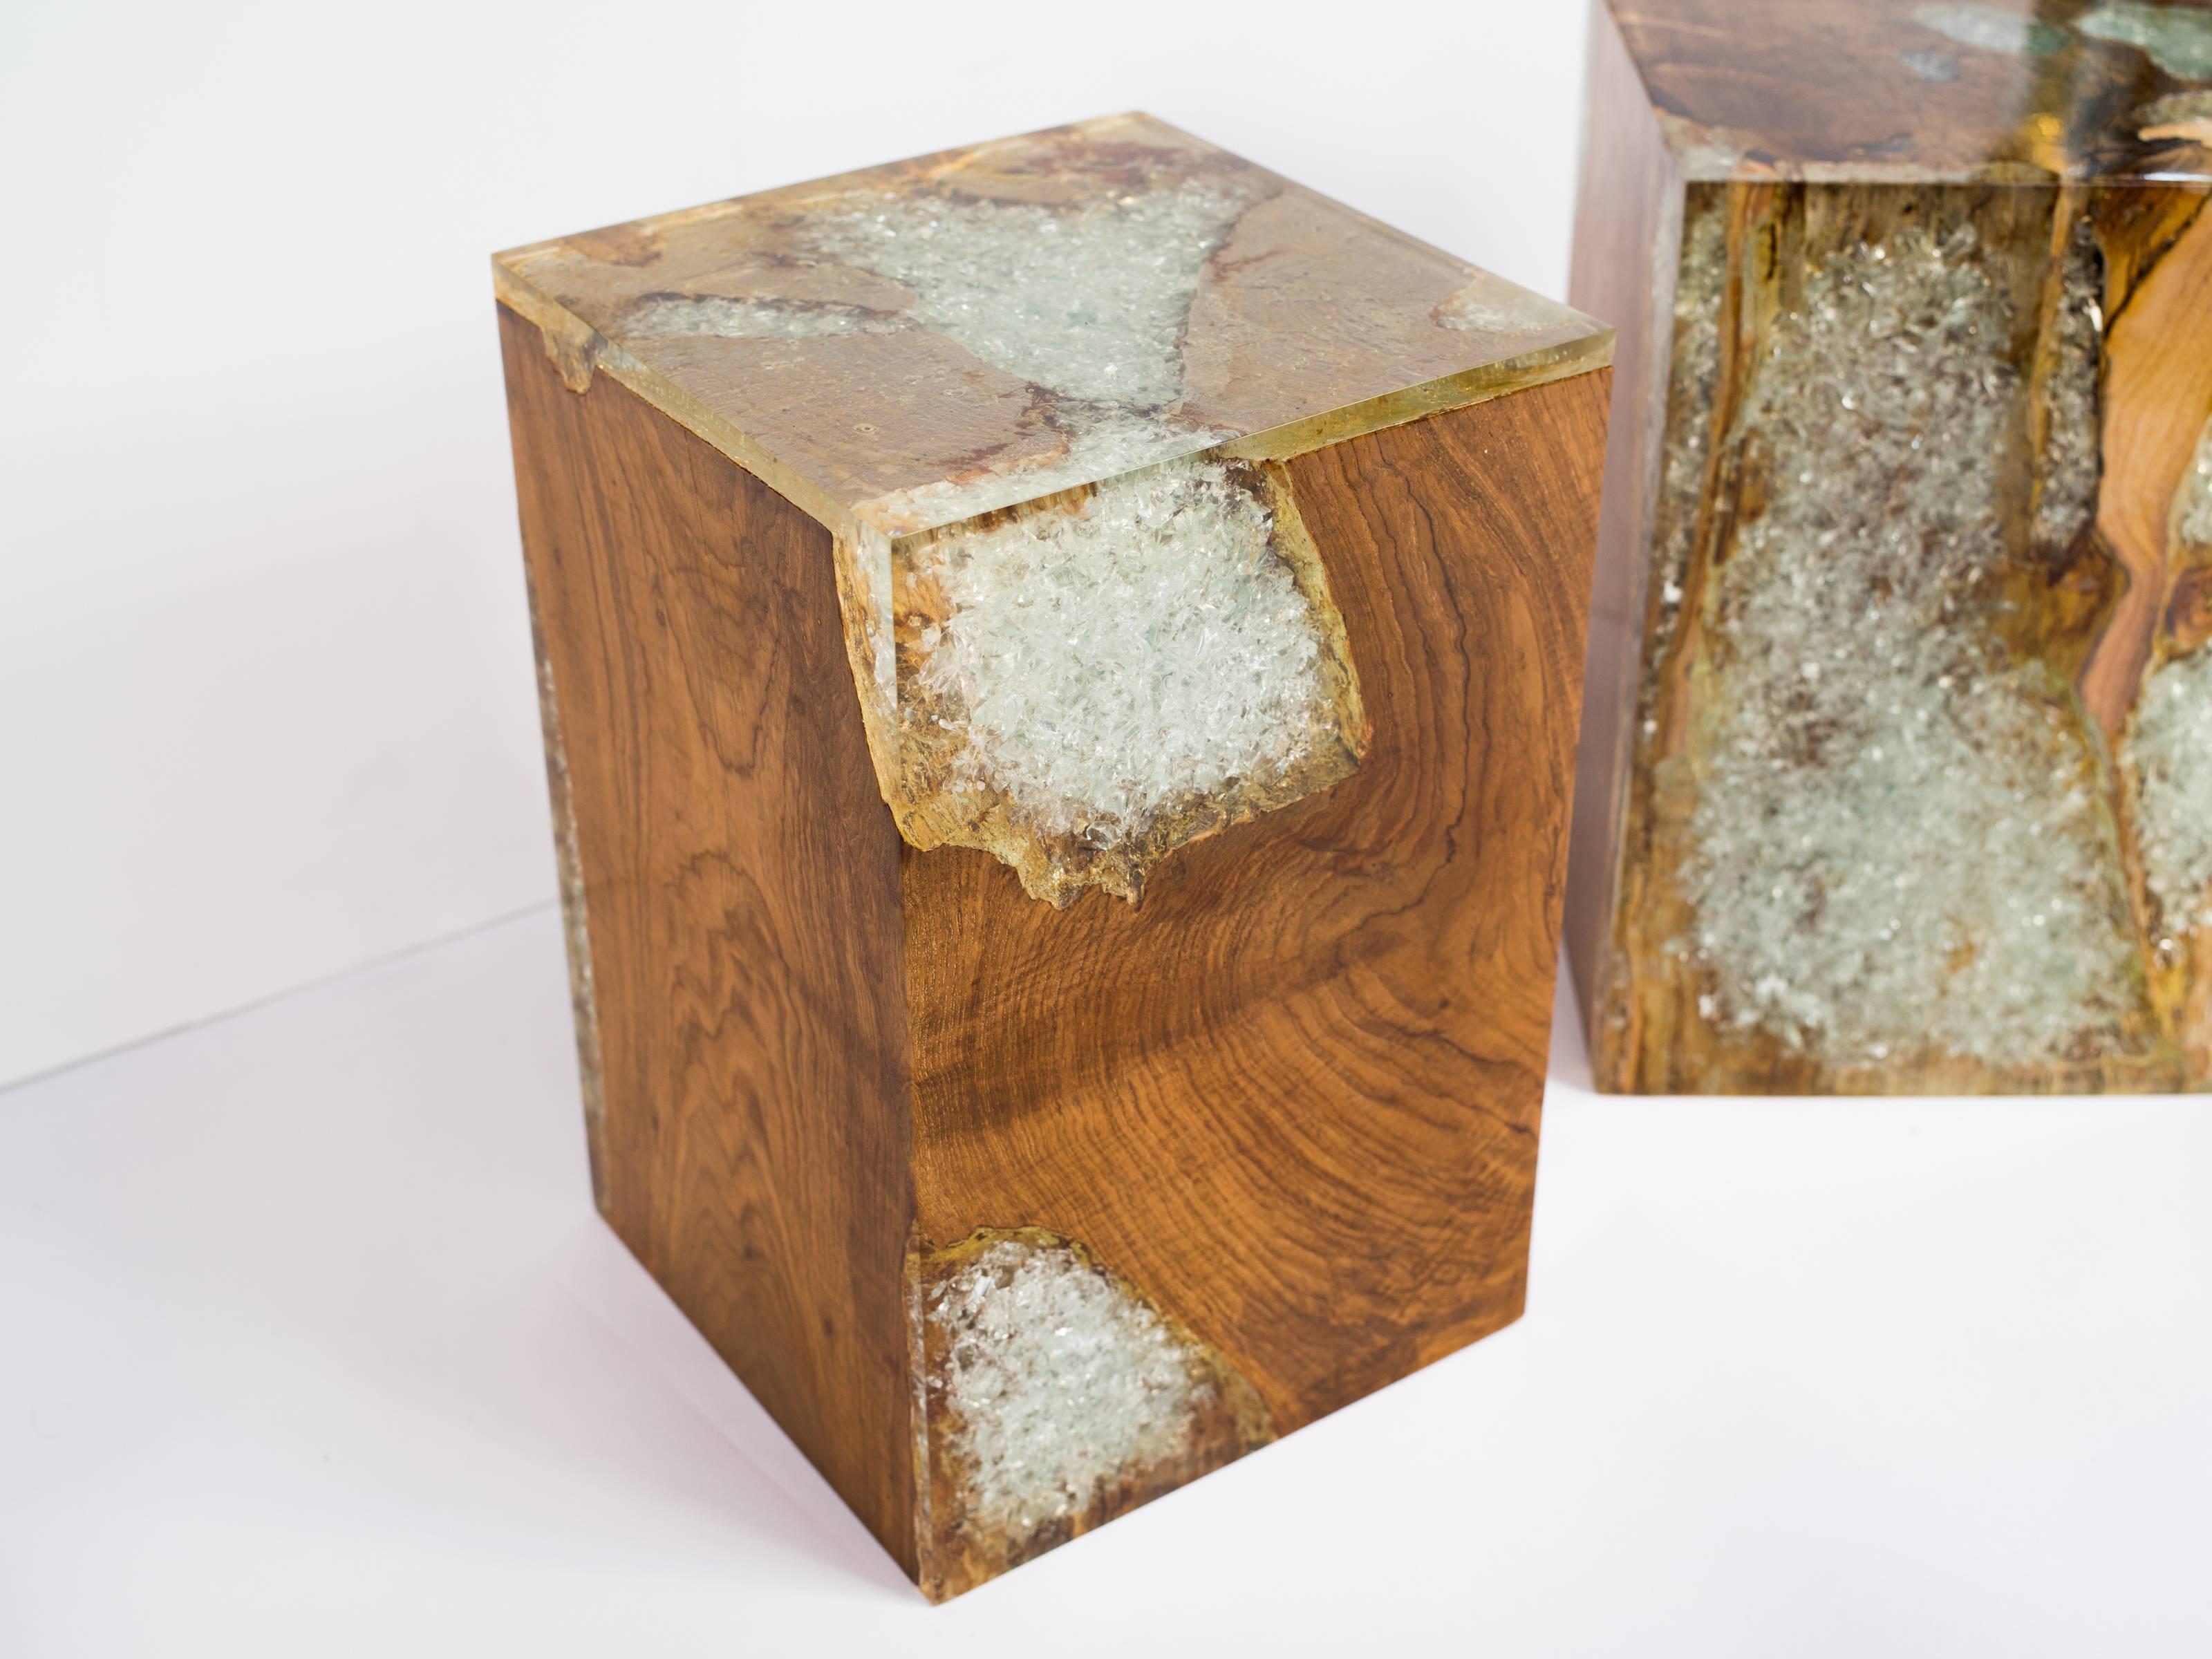 Organic modern cube table in natural and bleached teak root wood with cracked resin design. Polished finish with unique wood variations on all sides. Handcrafted and multi purpose use. Expect variation in color. Priced individually and multiple